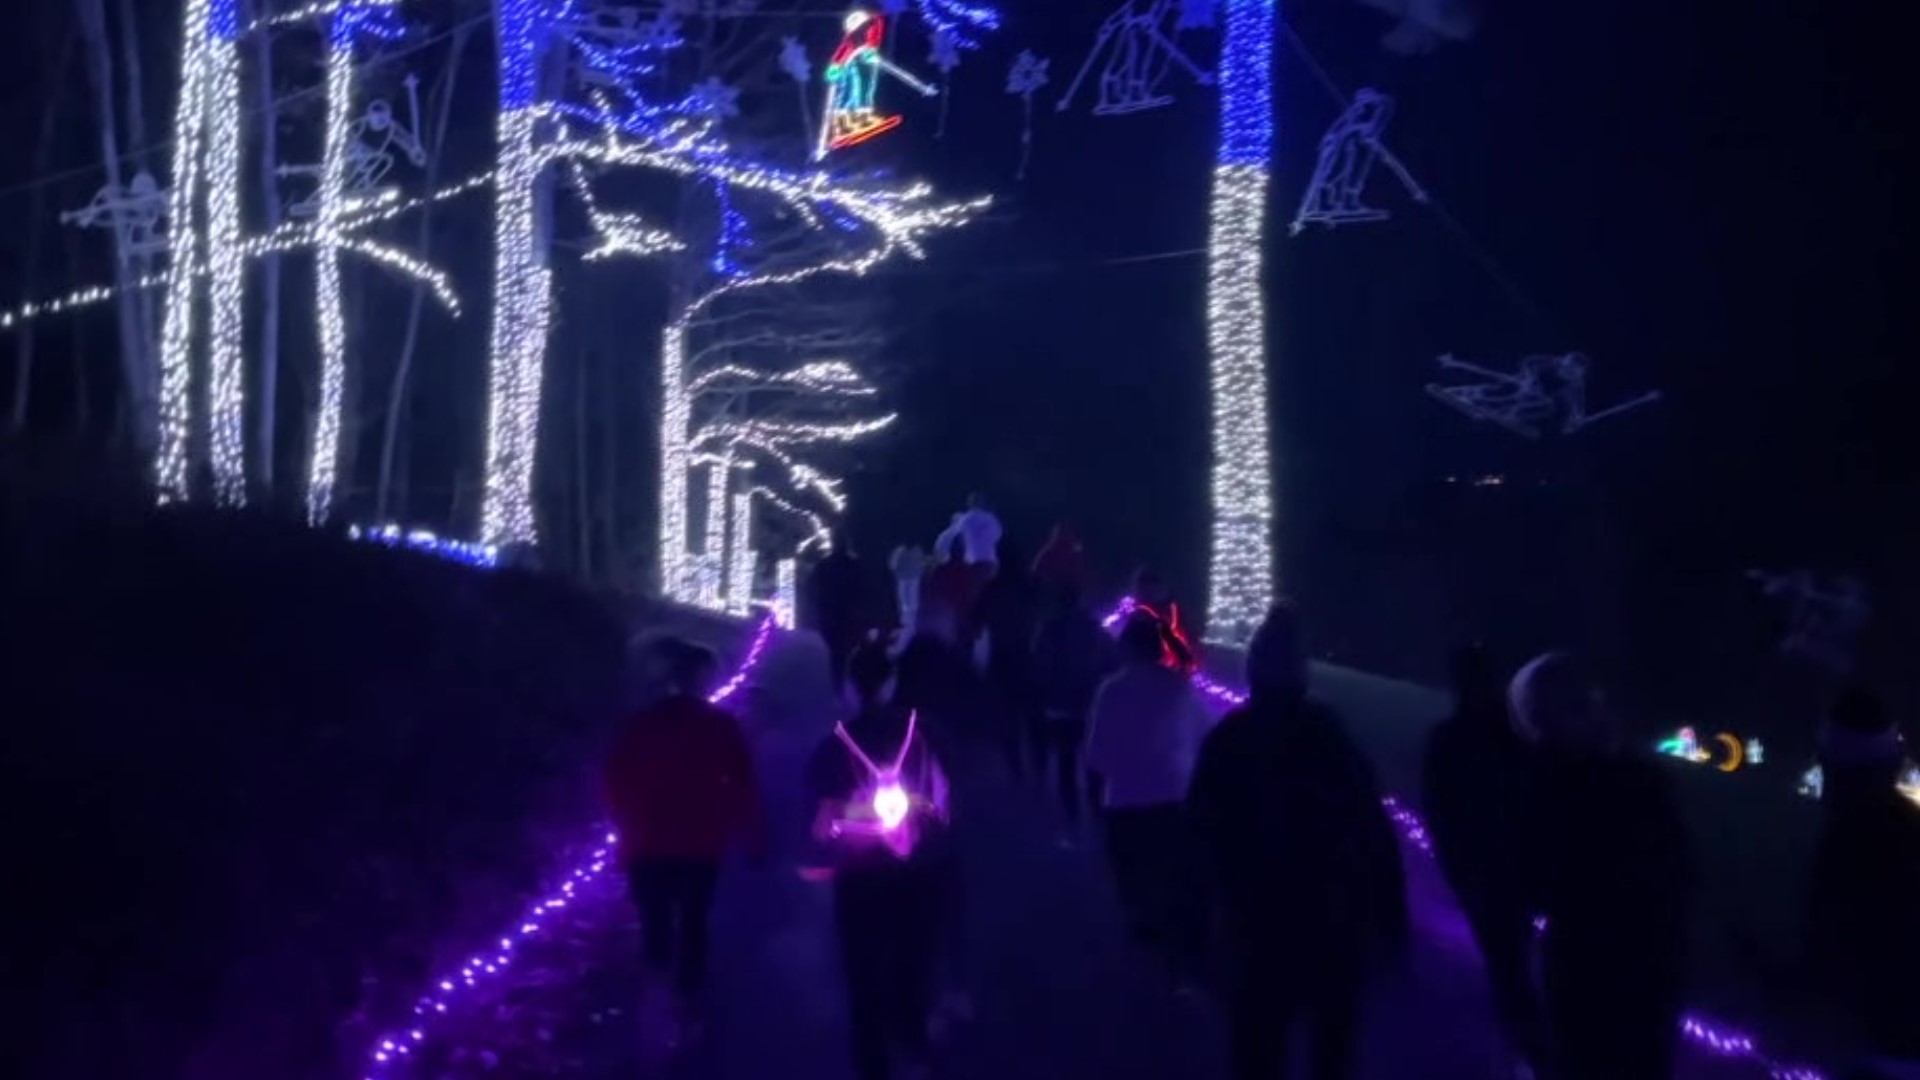 Hundreds gathered at Stone Hedge Golf Course to run a race through its Festival of Lights display.